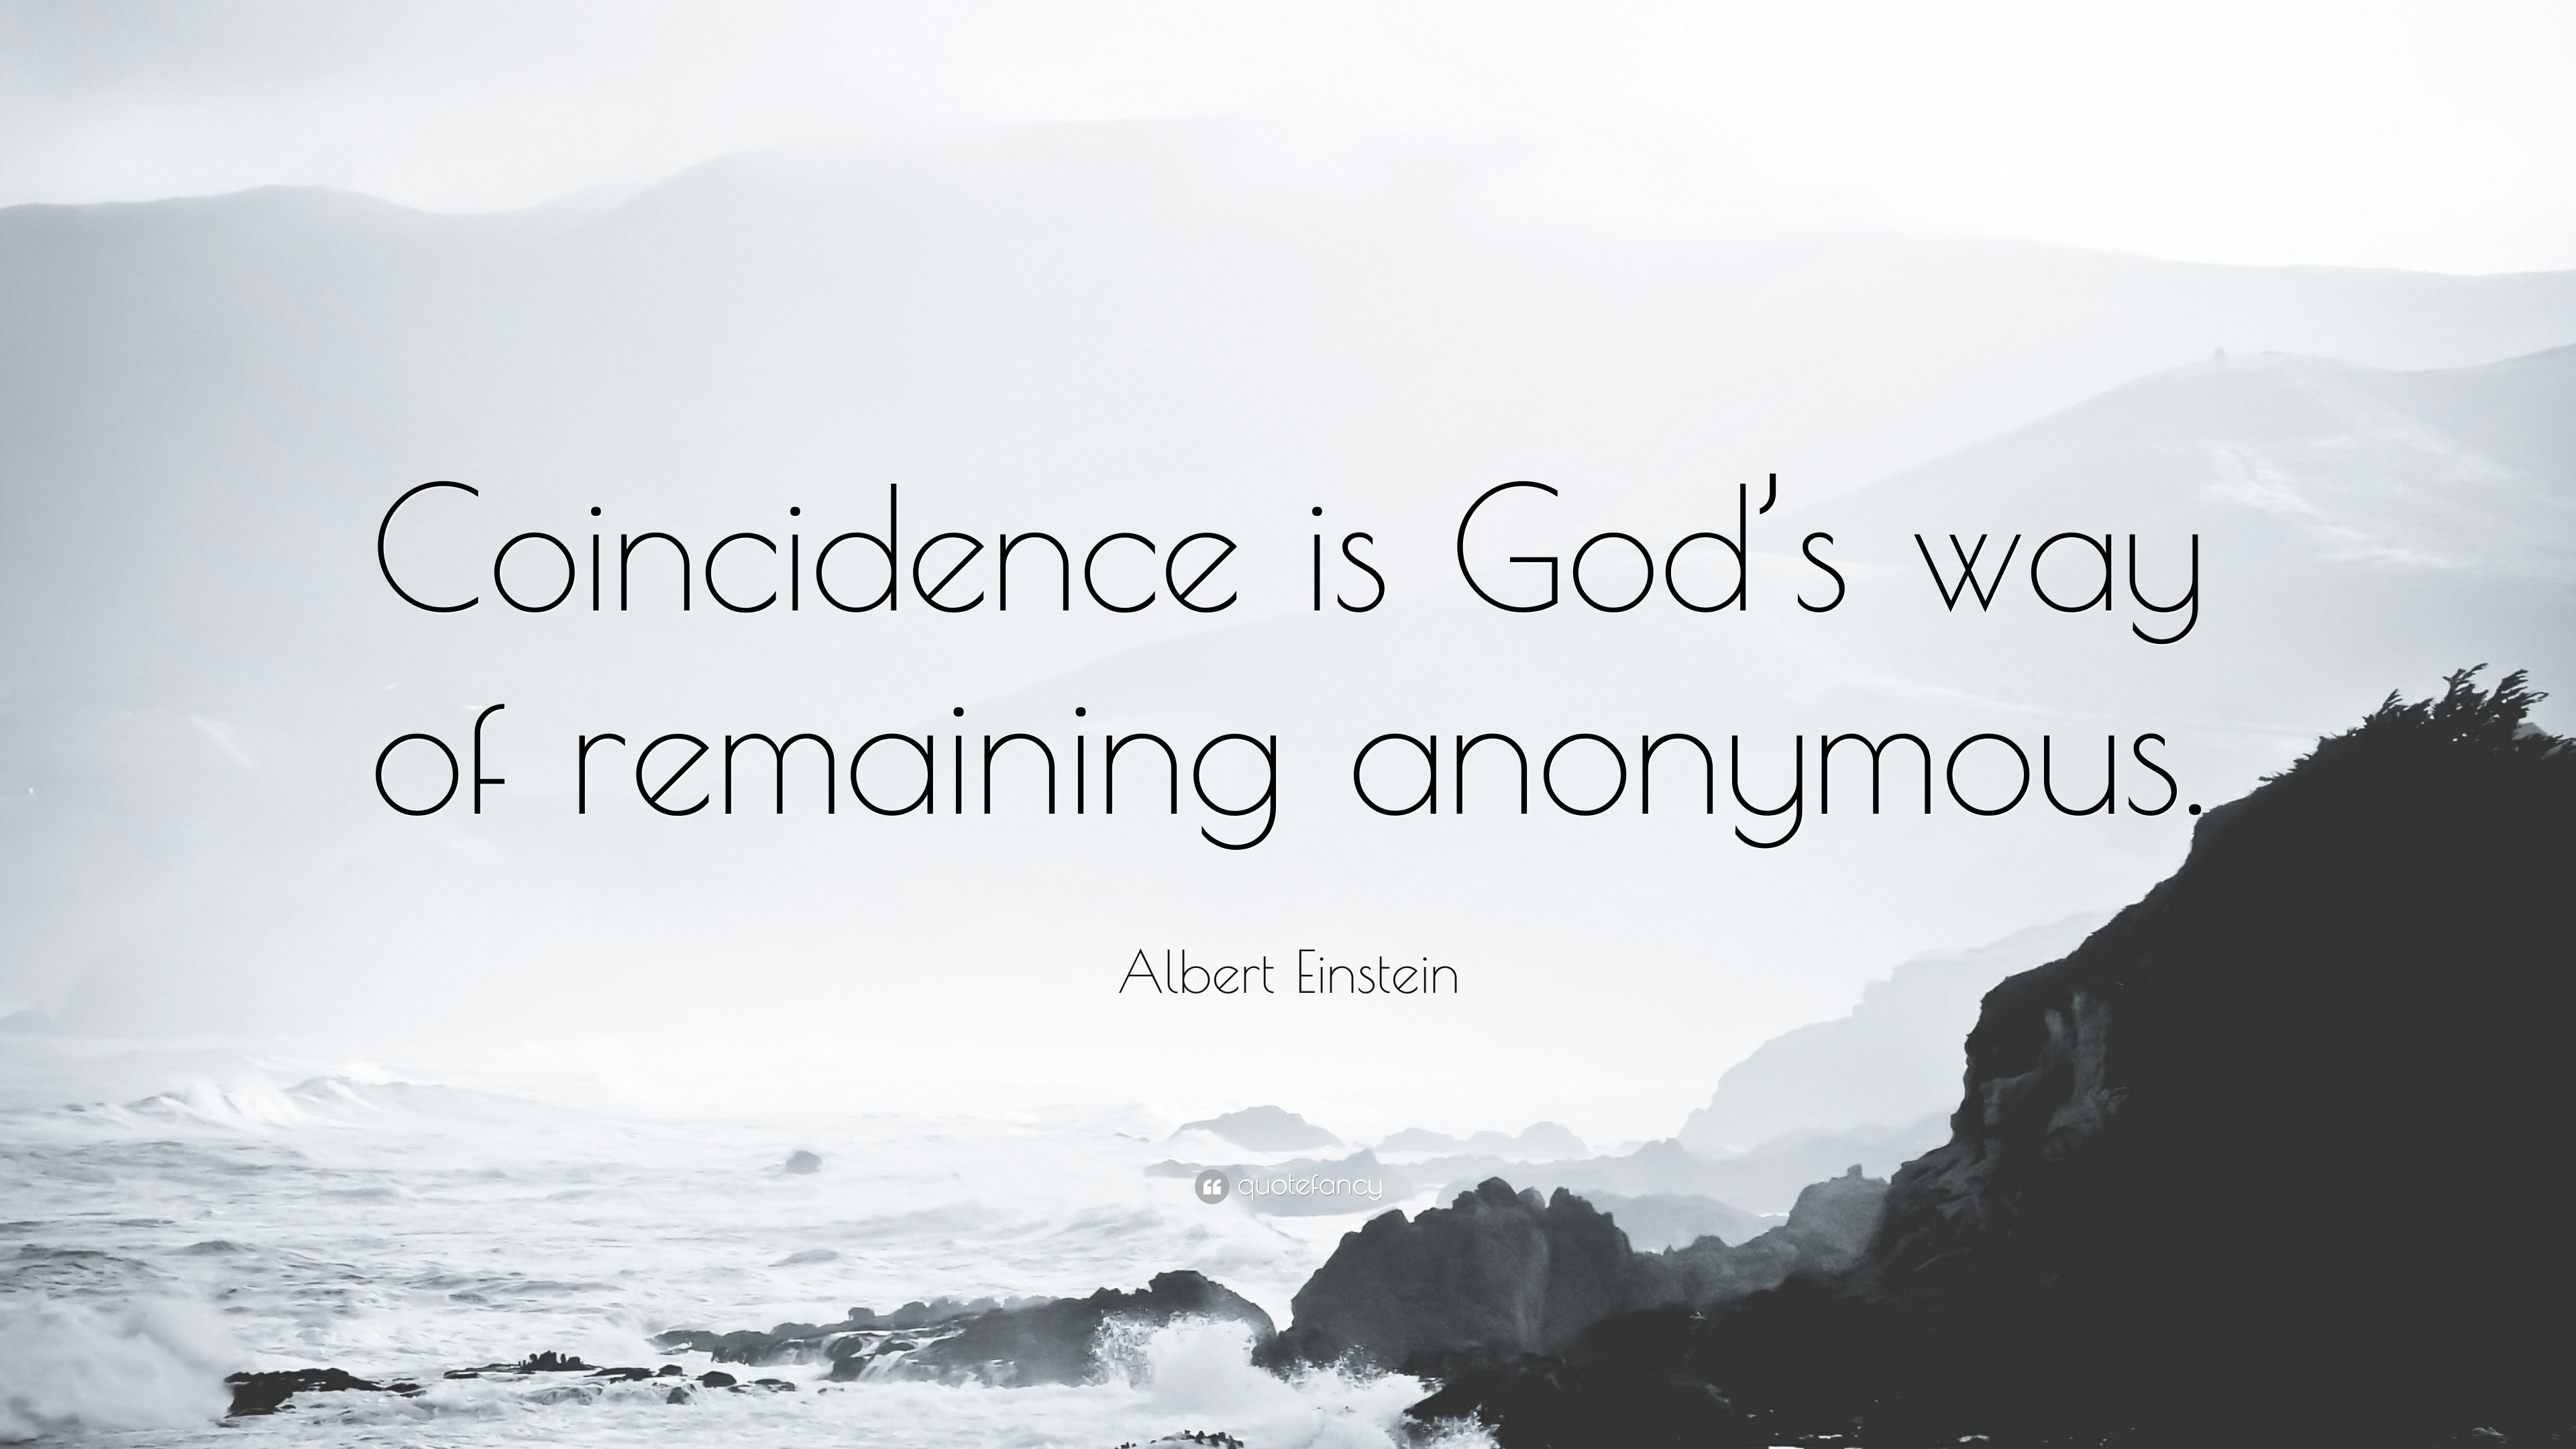 Albert Einstein Quote: “Coincidence is God’s way of remaining anonymous